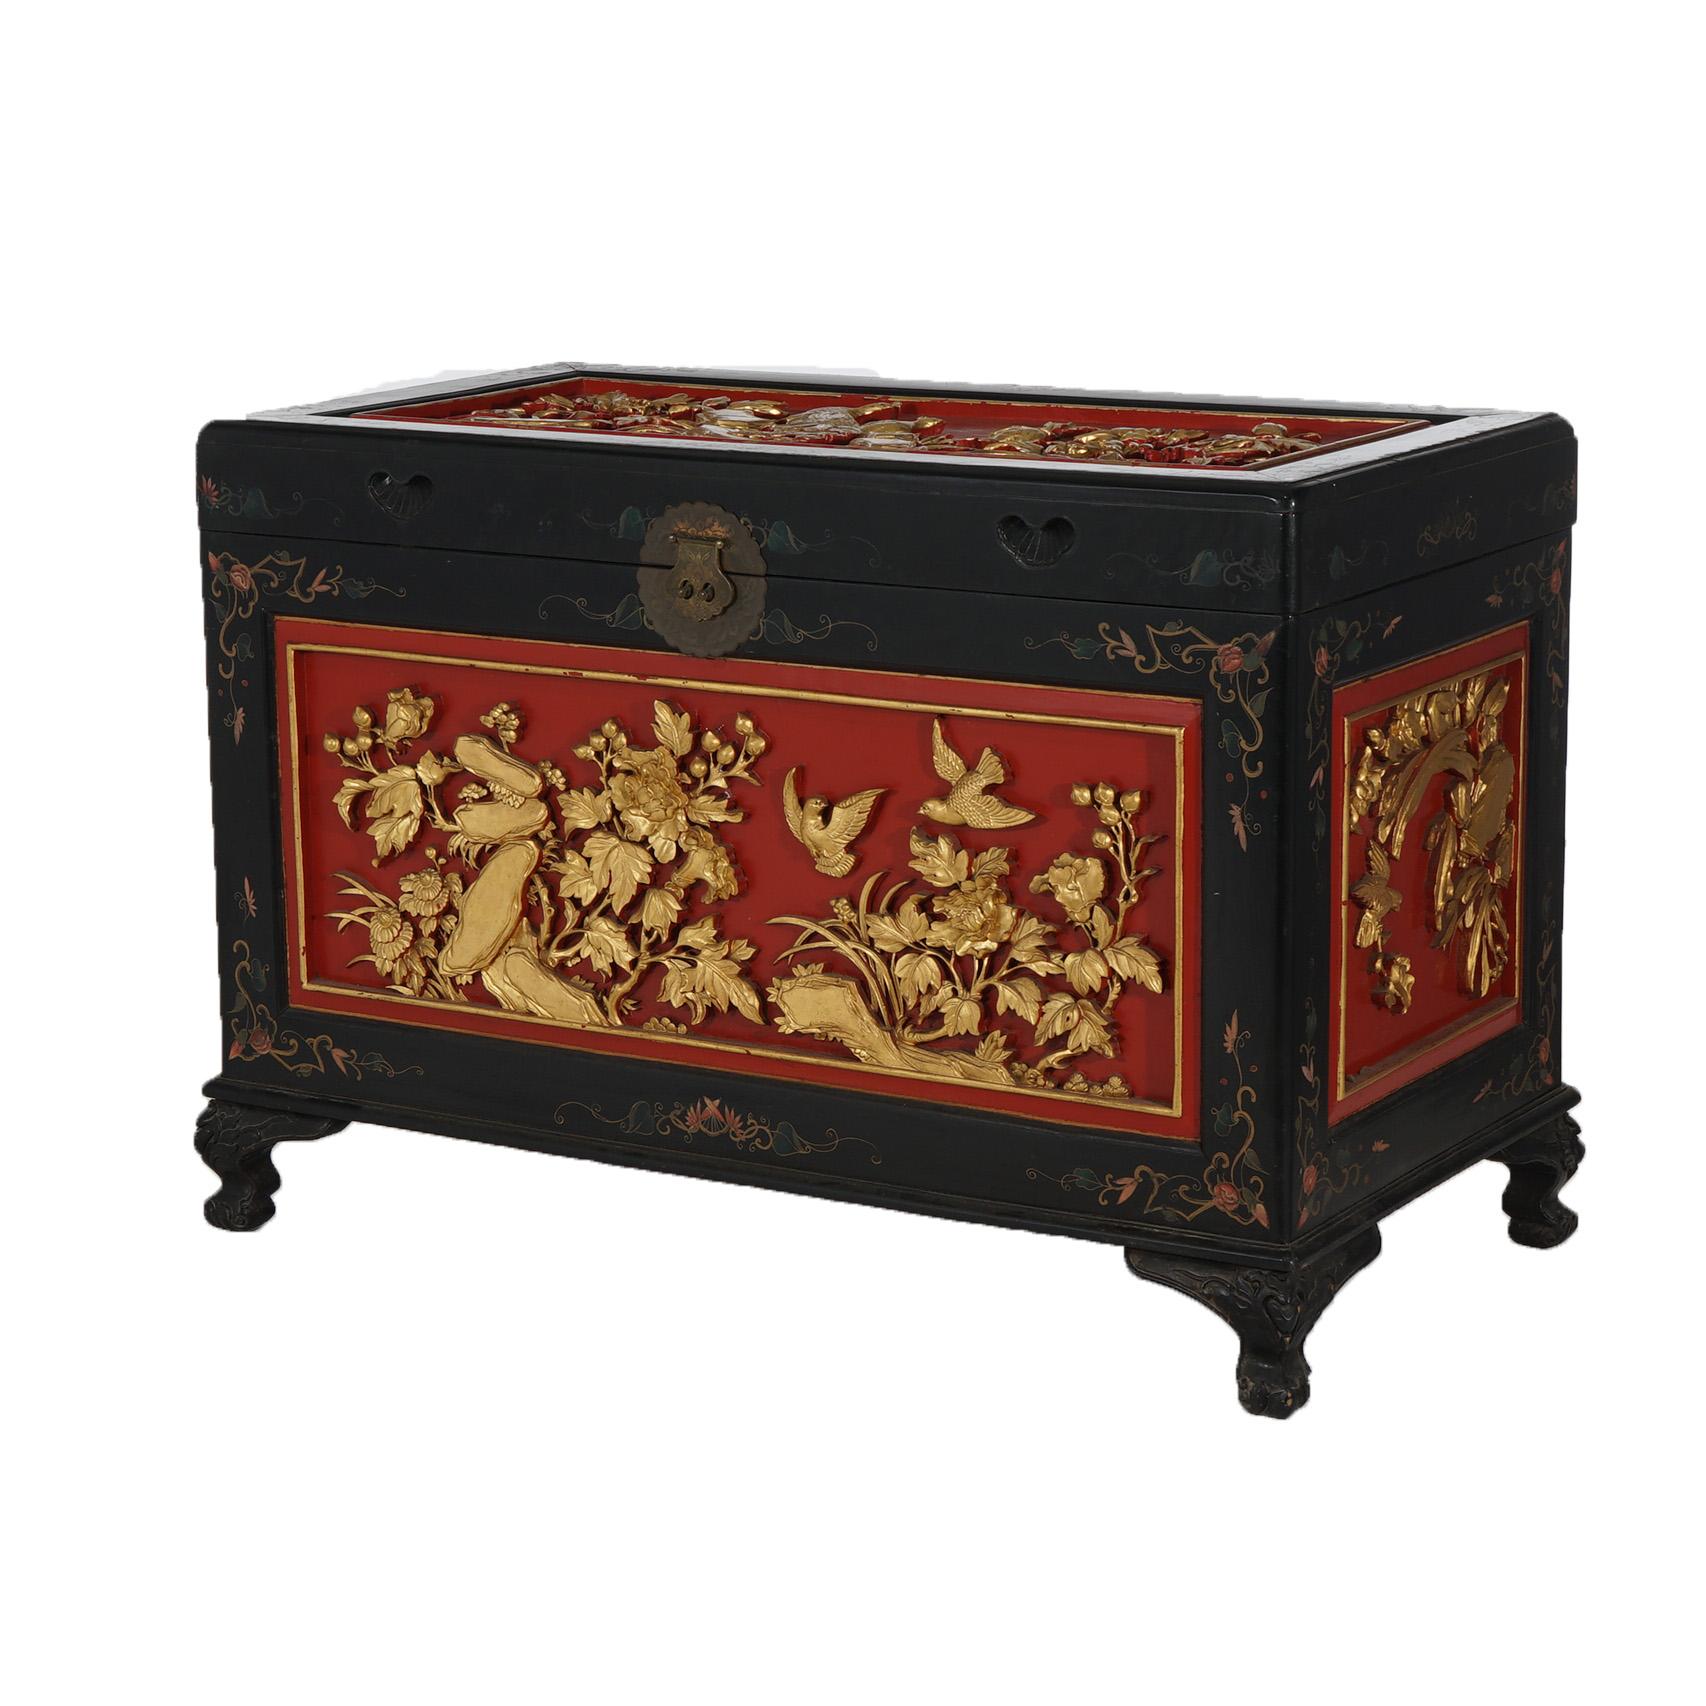 ***Ask About Reduced In-House Delivery Rates - Reliable Professional Service & Fully Insured***
Antique Chinese Deeply Carved, Polychromed, Ebonized, Vermillion and Gilt Blanket Chest with Birds & Flowers in Relief, Raised on Stylized Cabriole Legs,